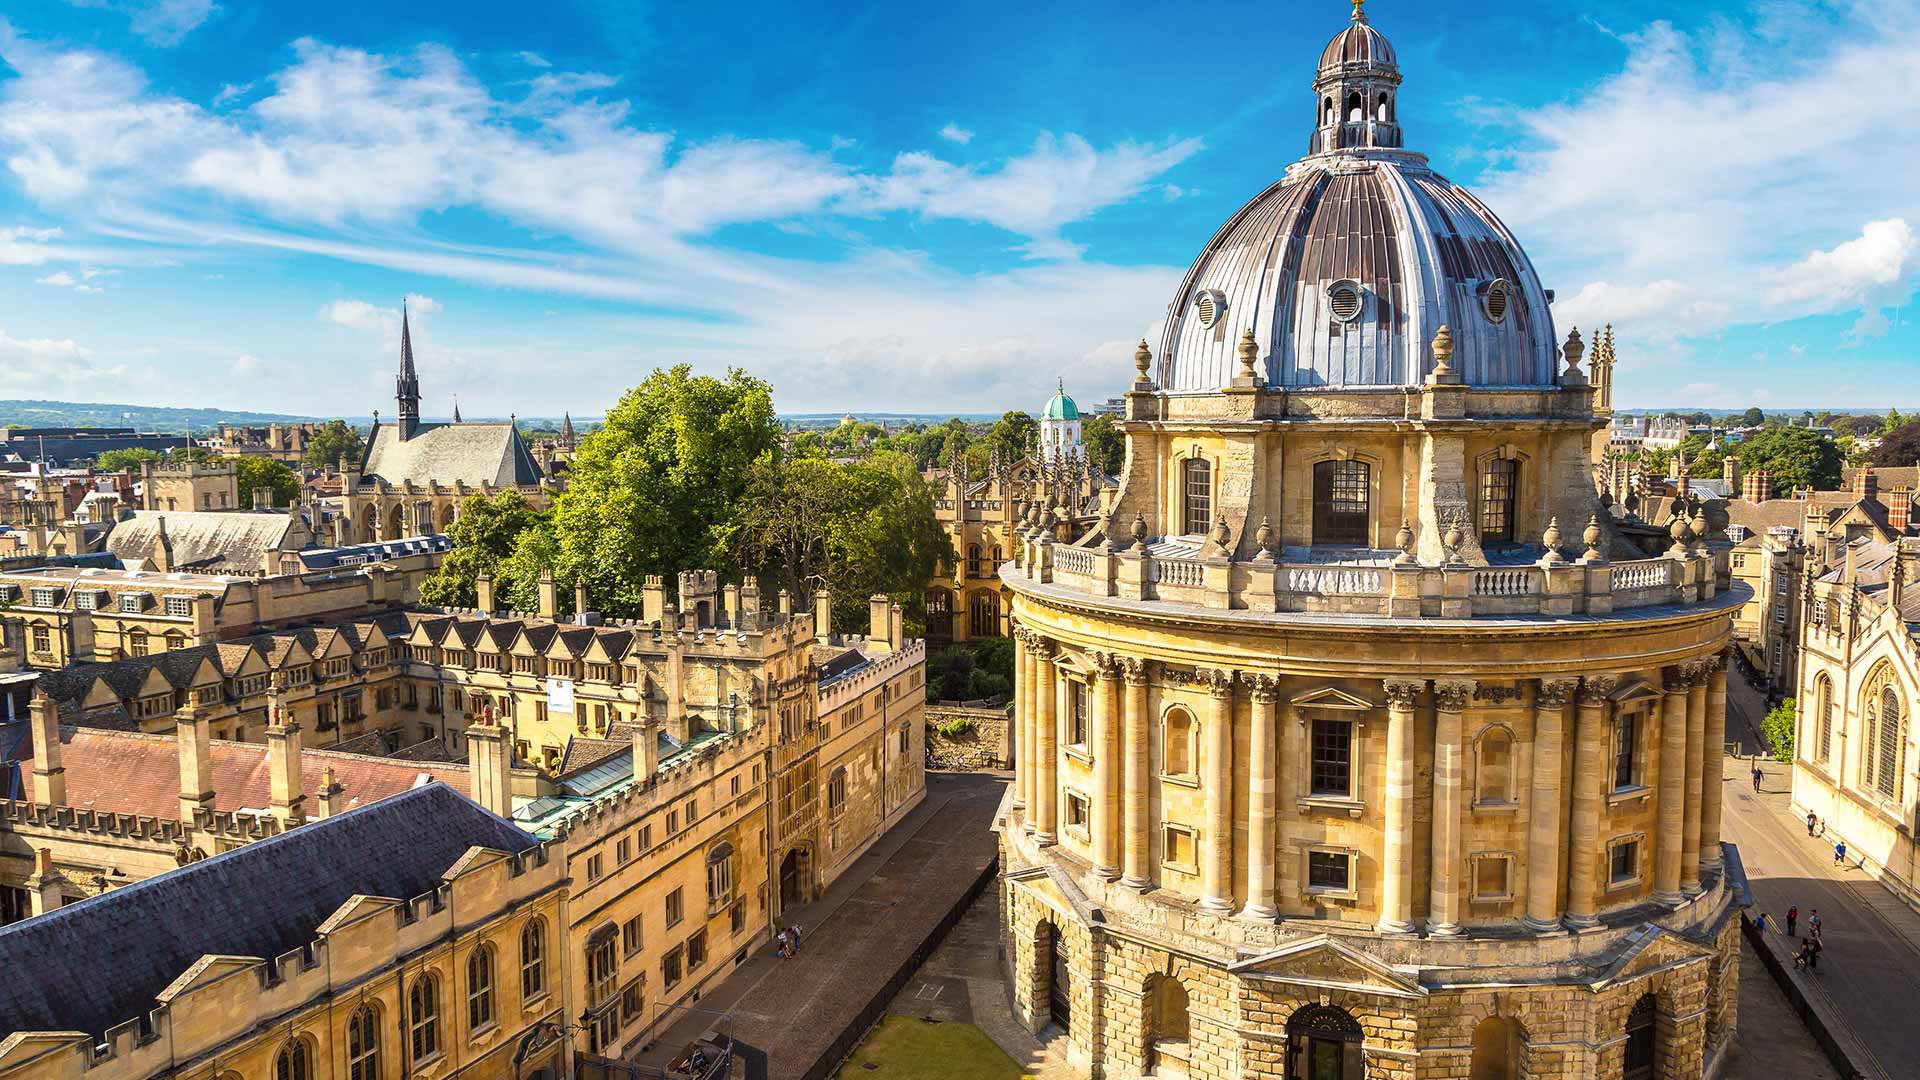 The Bodleian Library in Oxford, England